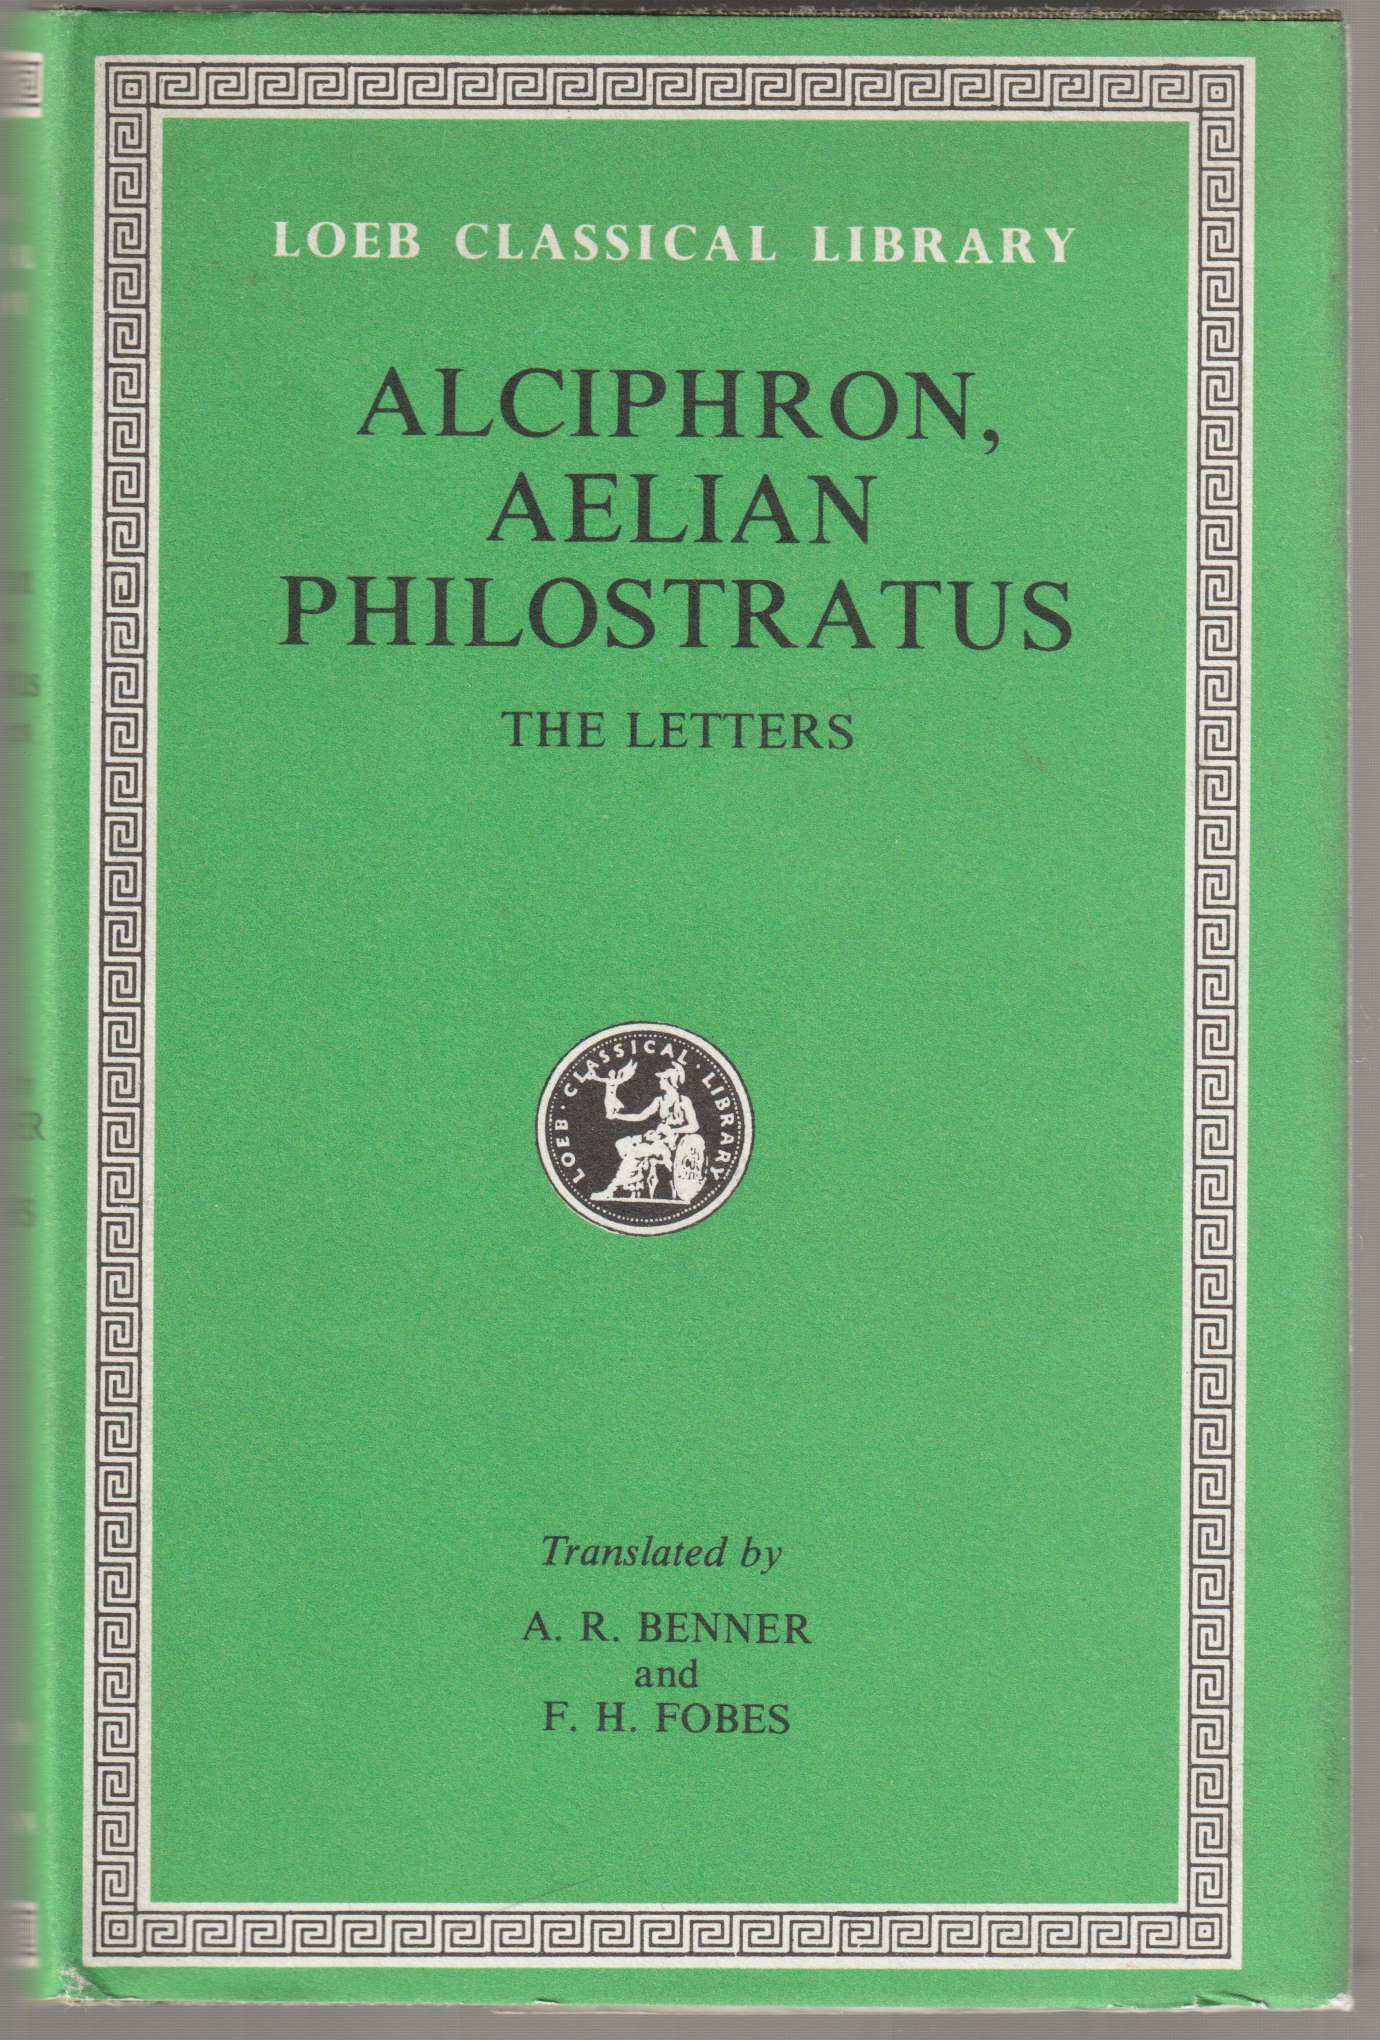 The letters of Alciphron, Aelian and Philostratus.